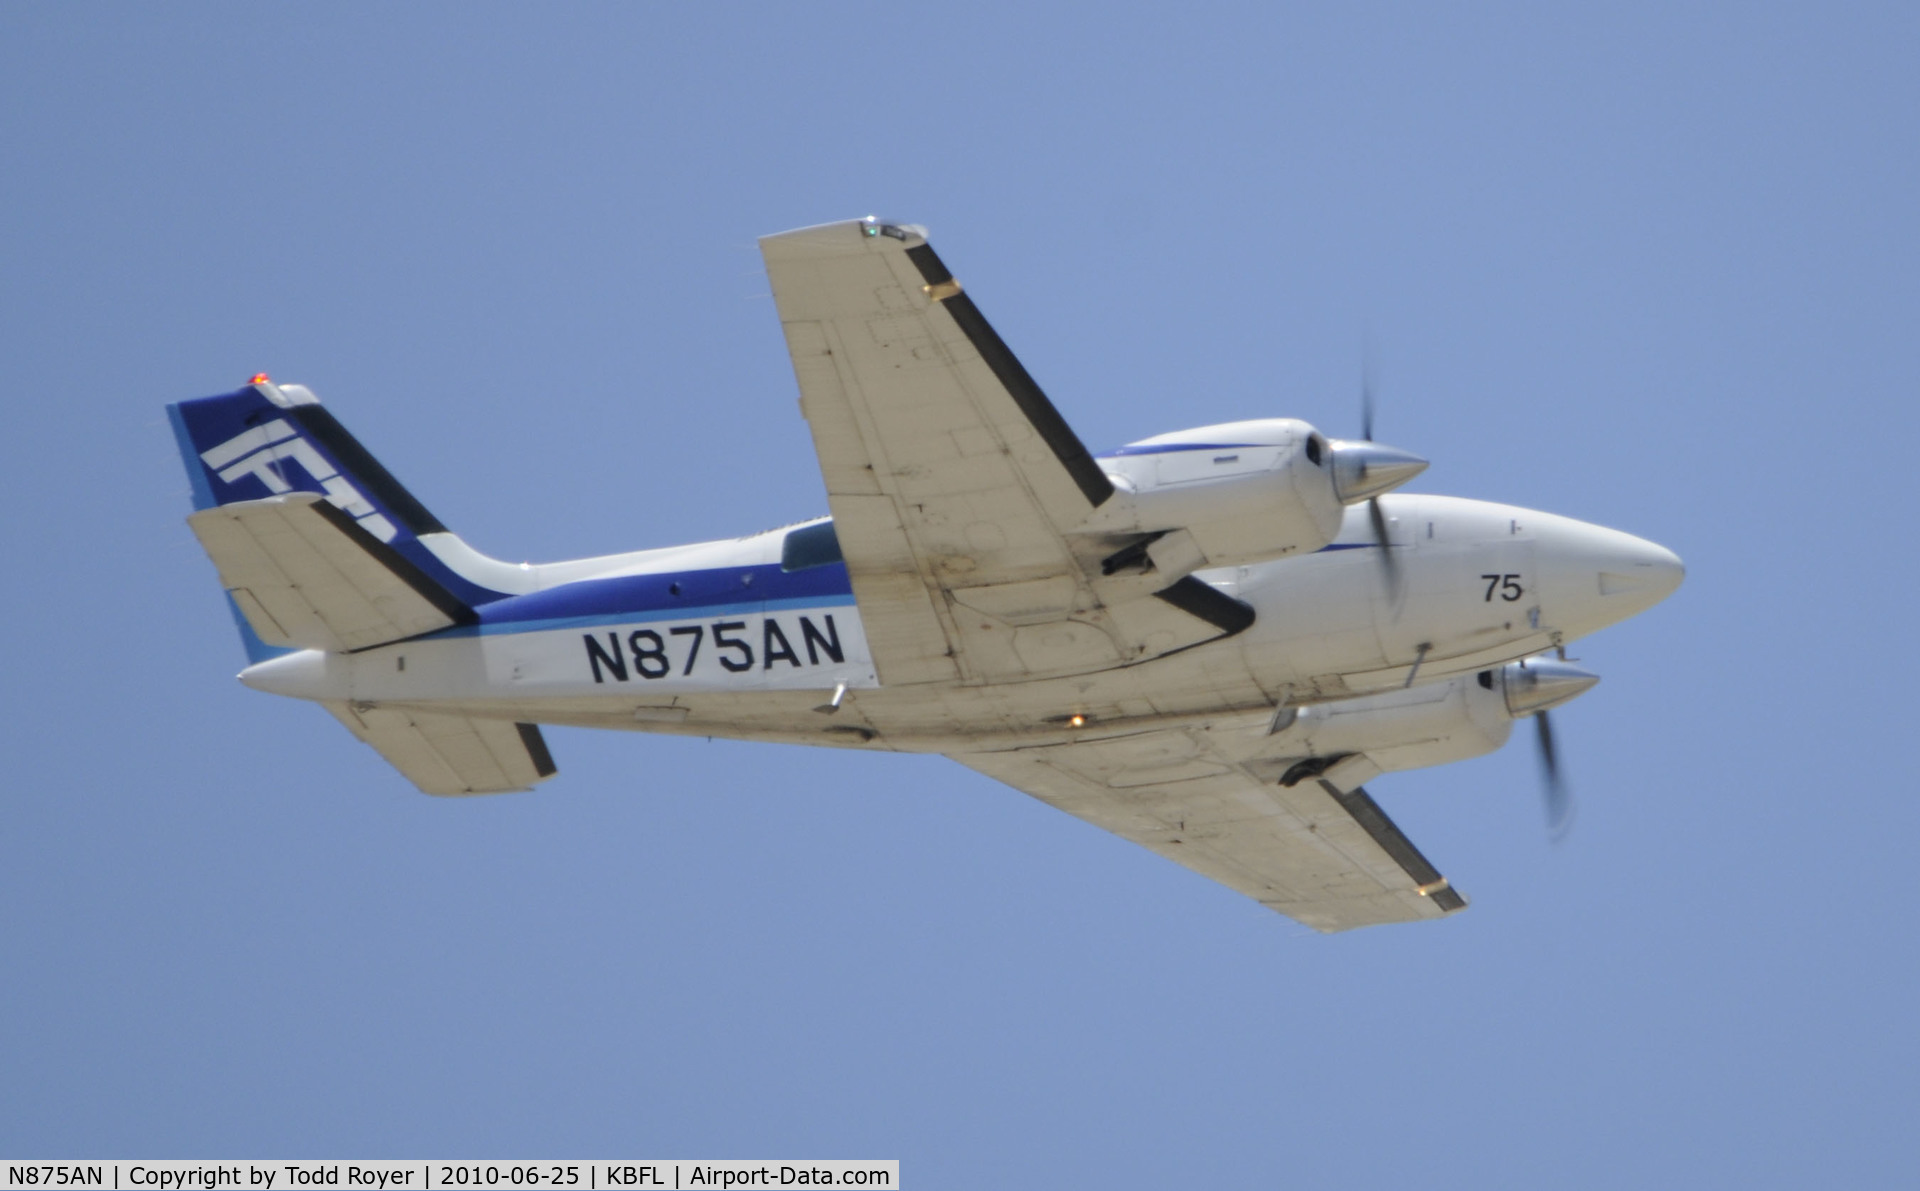 N875AN, 1993 Beech 58 Baron C/N TH-1682, learning to fly at Bakersfield